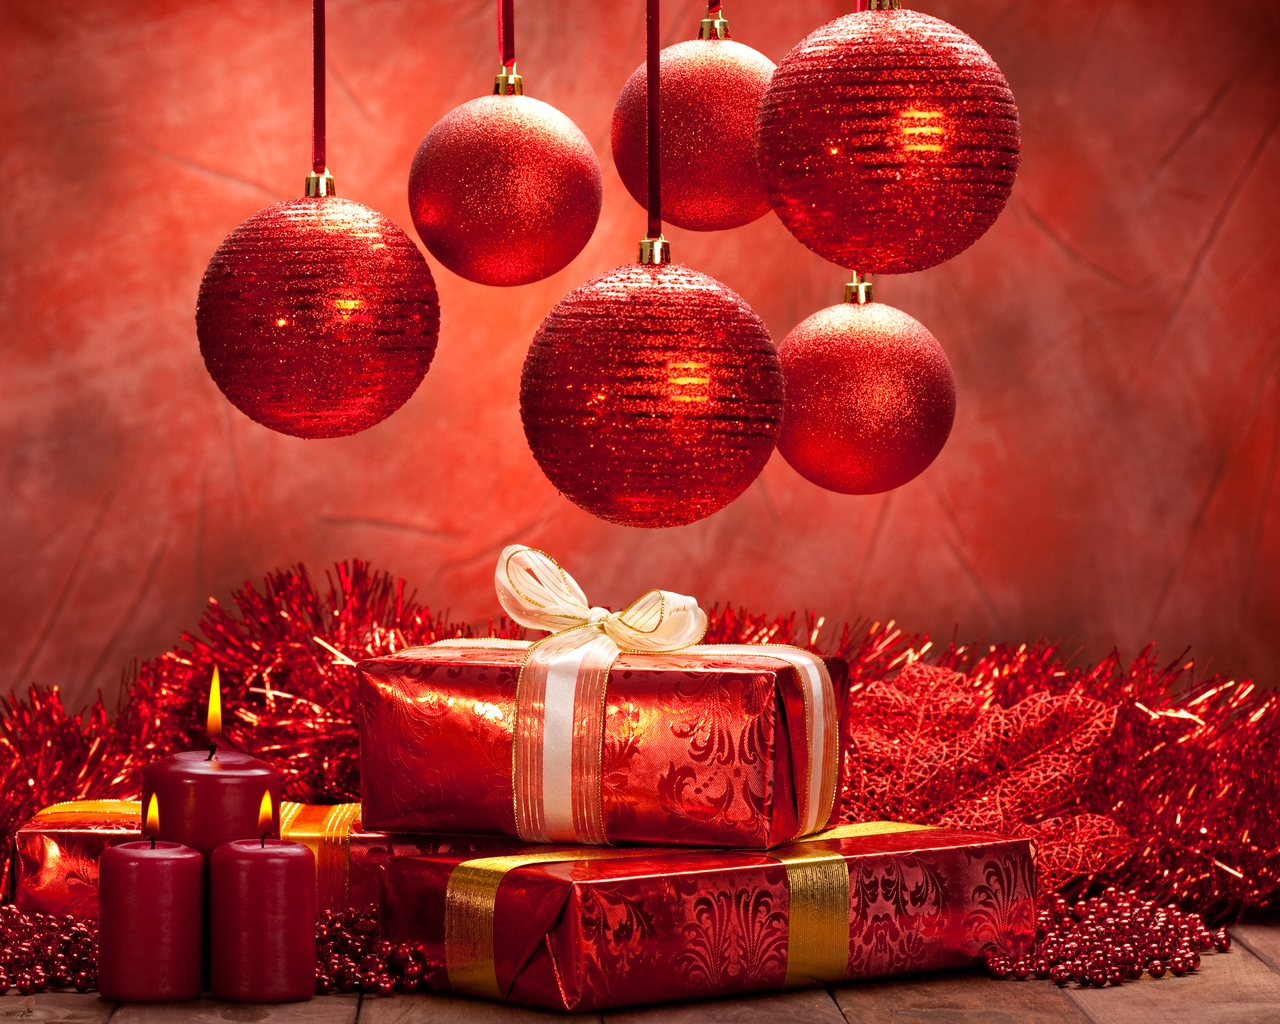 Christmas Balls and Gifts for 1280 x 1024 resolution